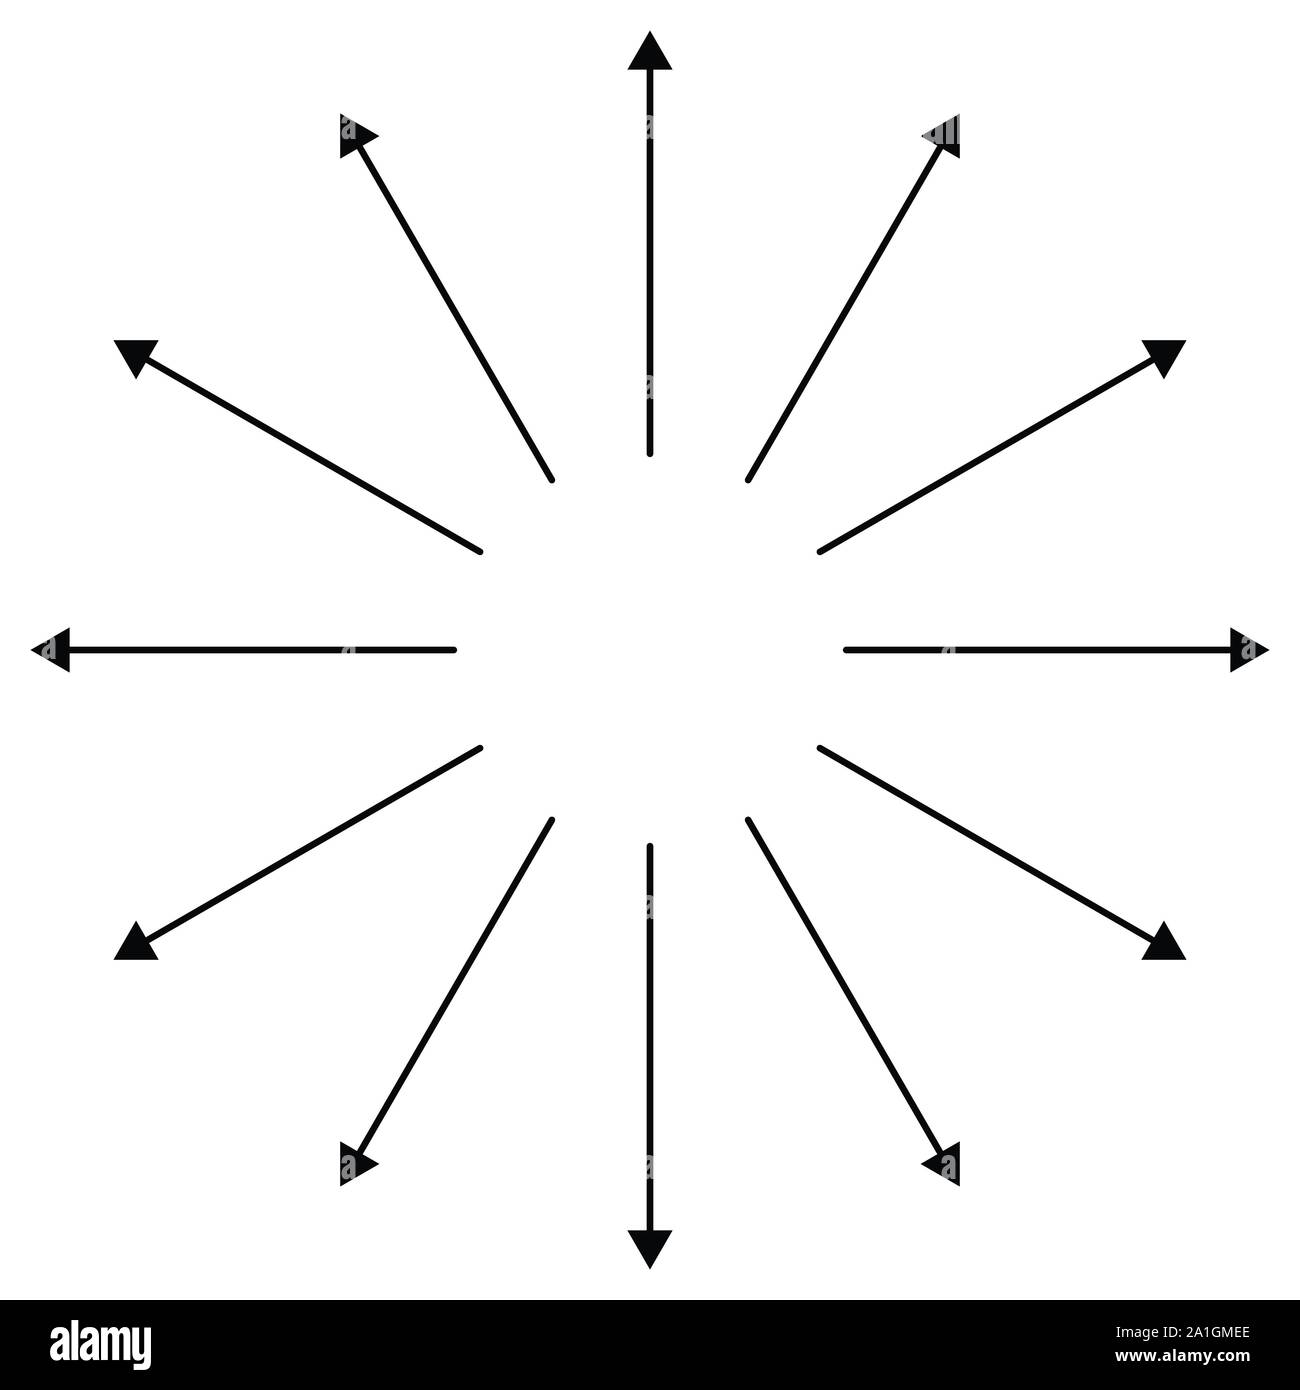 Radial, circular arrows pointing from center. Concentric pointers for extrusion, protrusion themes. Diffuse, dissension, bloat concept cursors illustr Stock Vector